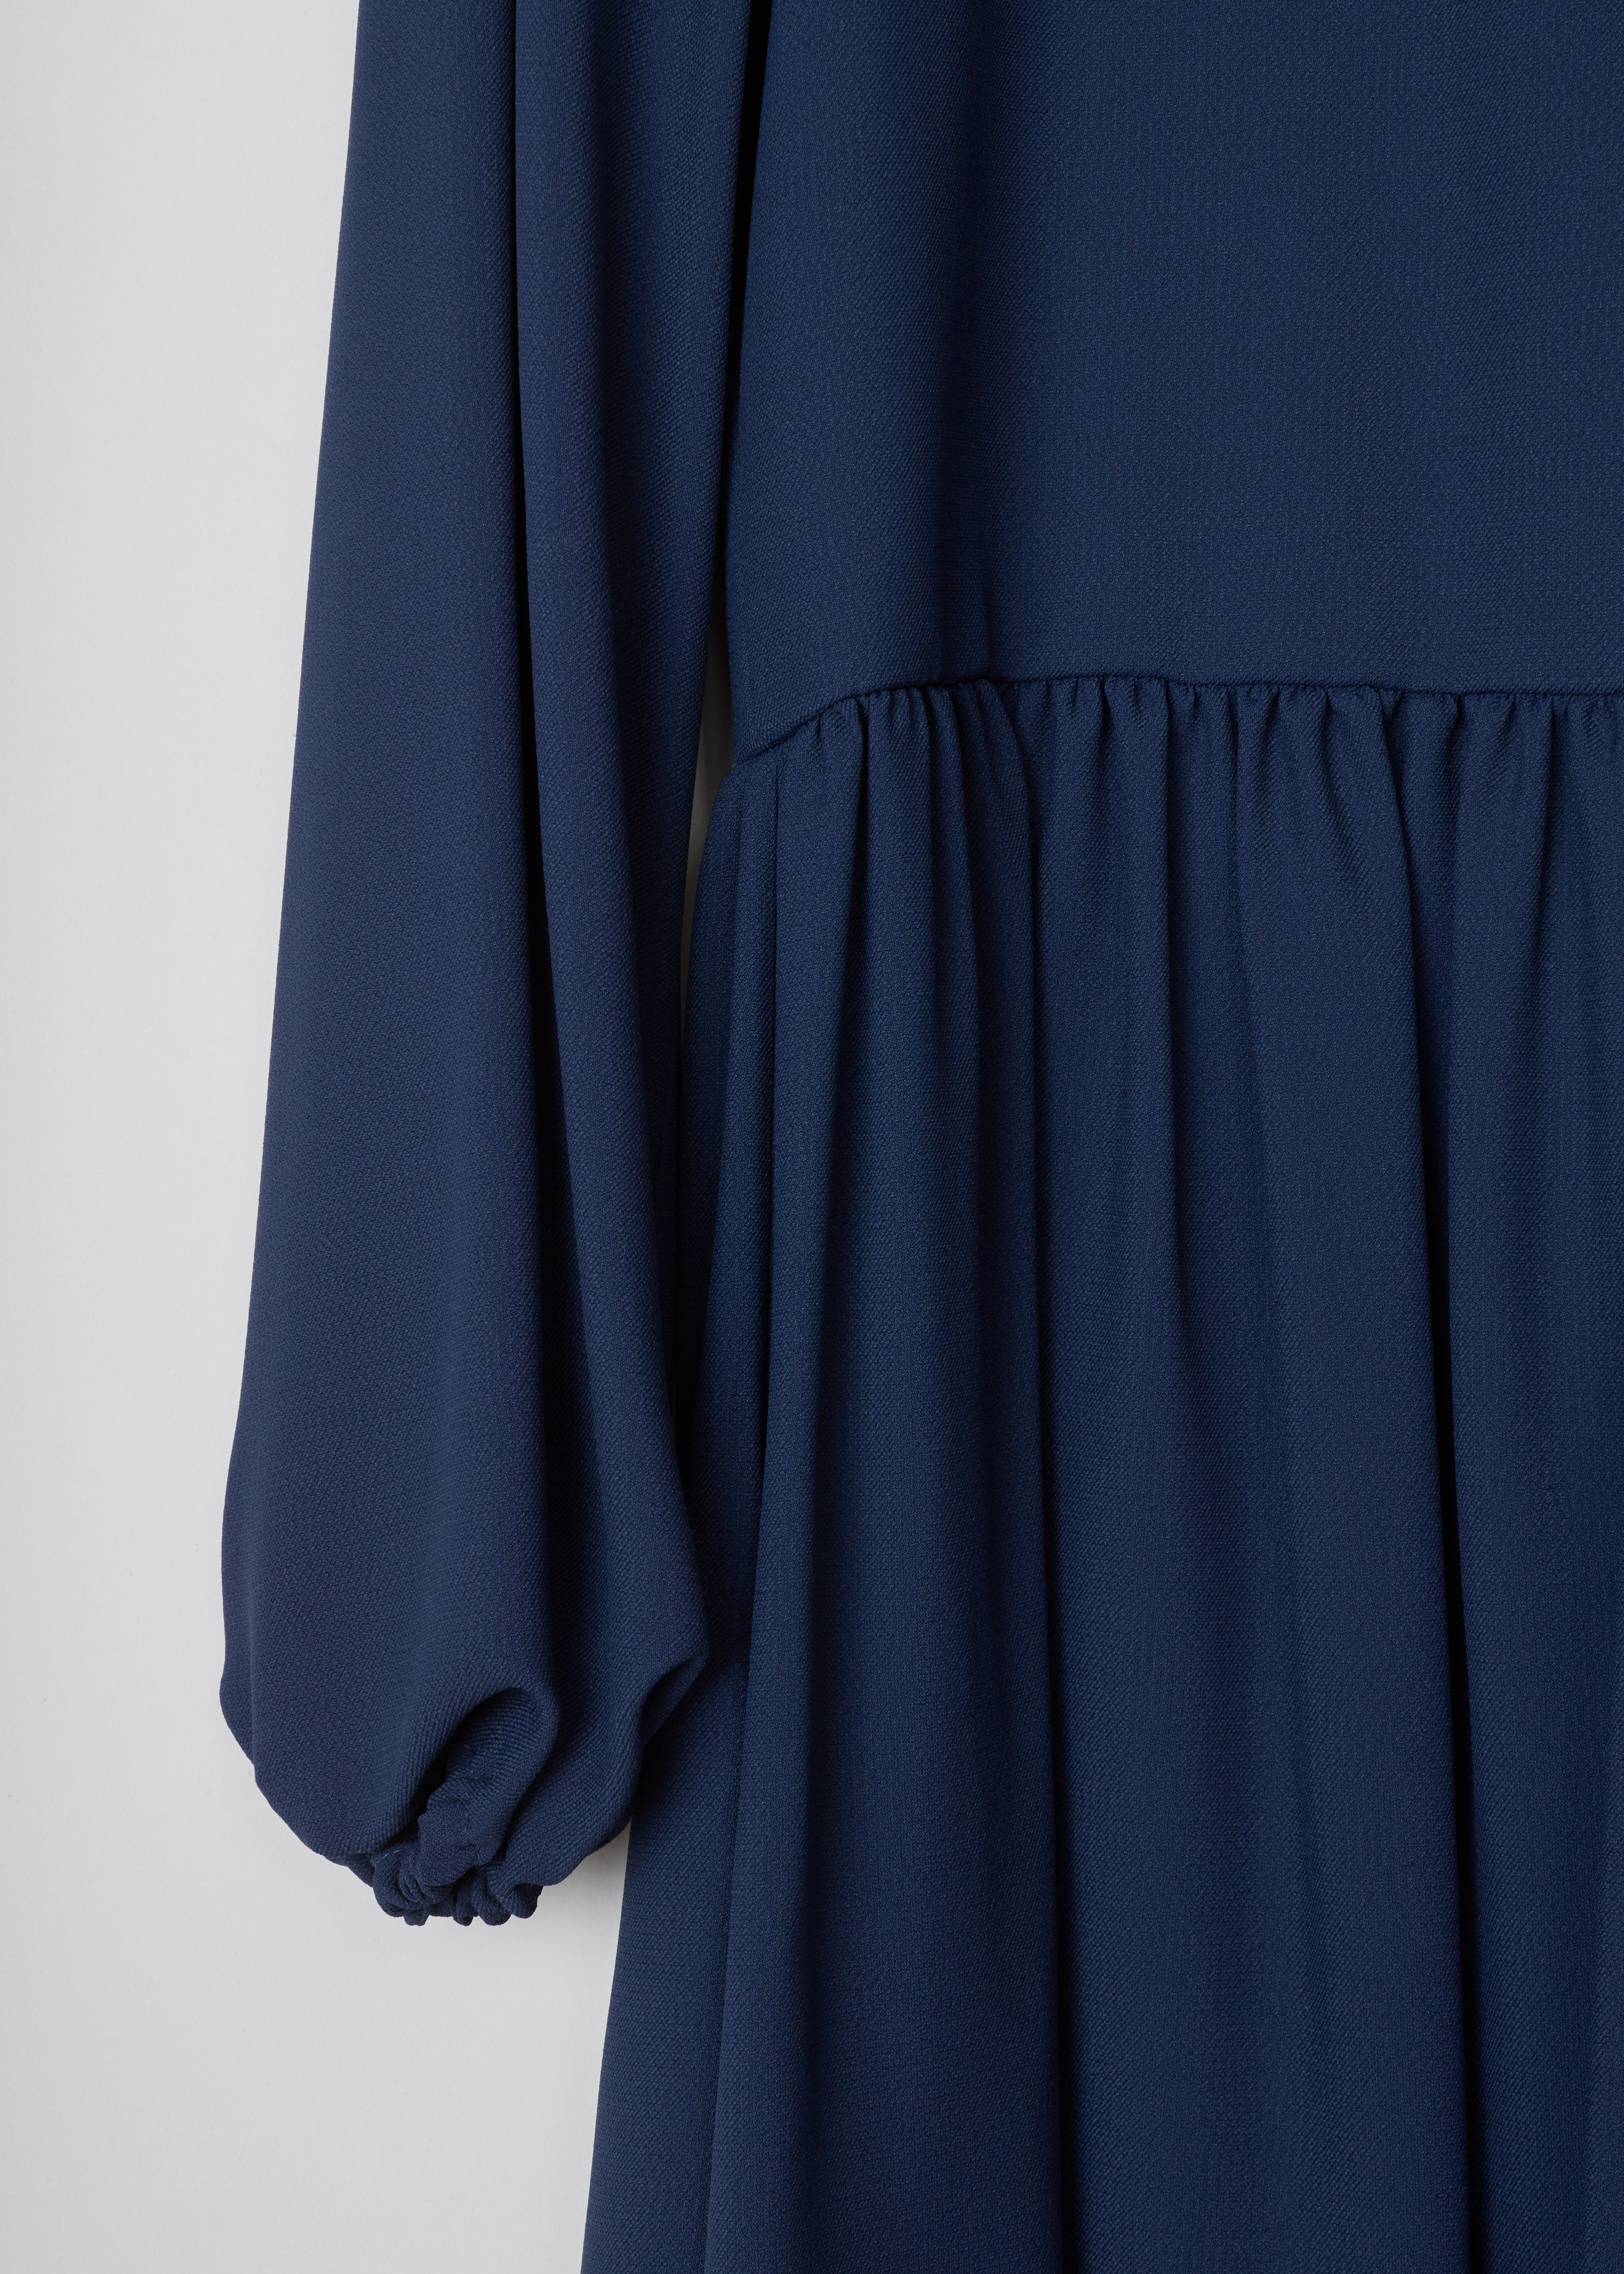 Chloé Gathered deep blue dress 17SRO65_17S37_7B5 deep blue detail. Deep blue dress with a V-neck. This model has loose sleeves and gathered cuffs. The straight cut has small pleats around the waist and a midi length. As closure this dress has an invisible zipper on the side.